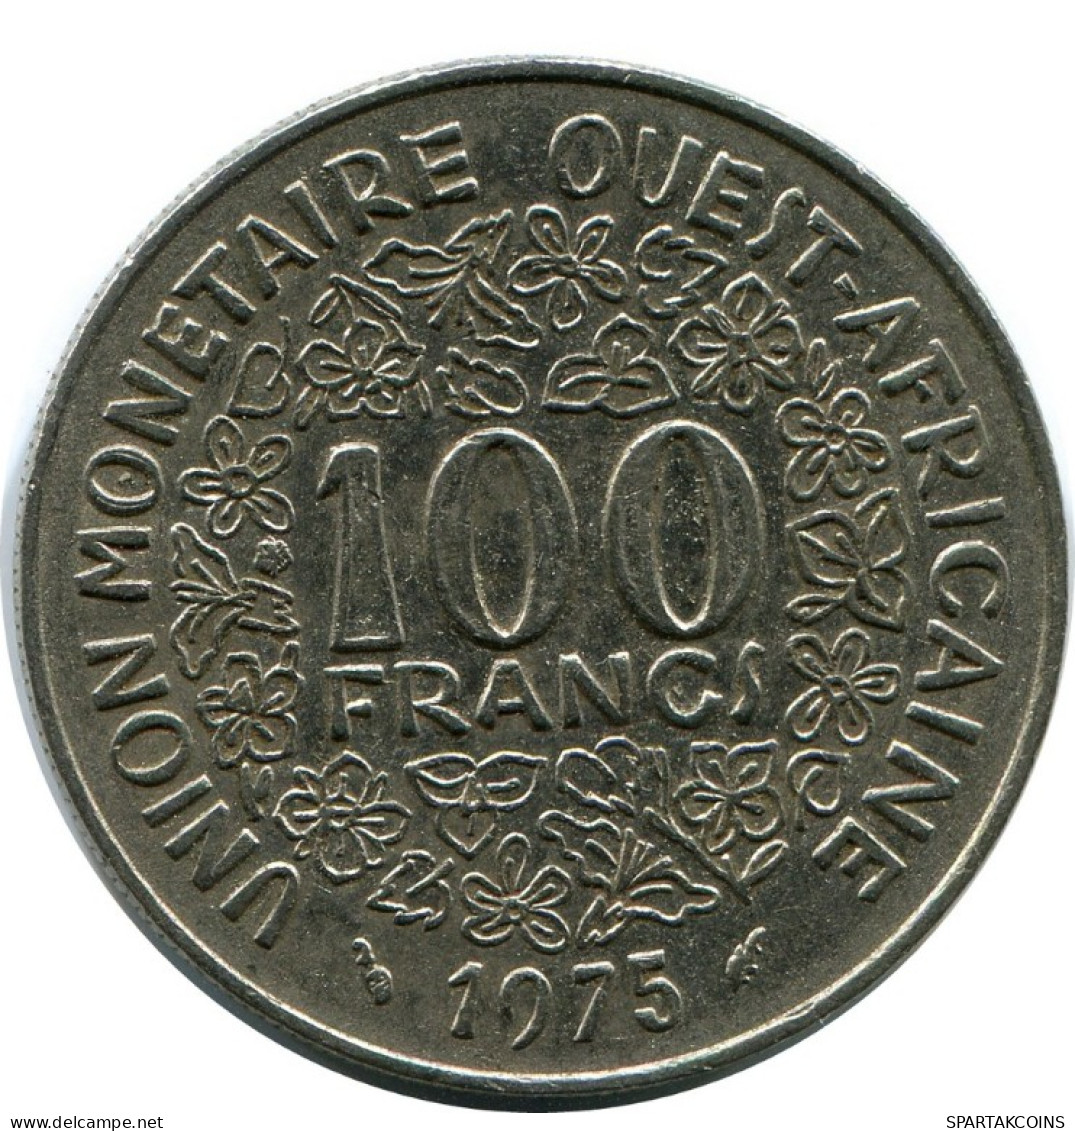 100 FRANCS 1975 WESTERN AFRICAN STATES Coin #AH629.3.U.A - Andere - Afrika